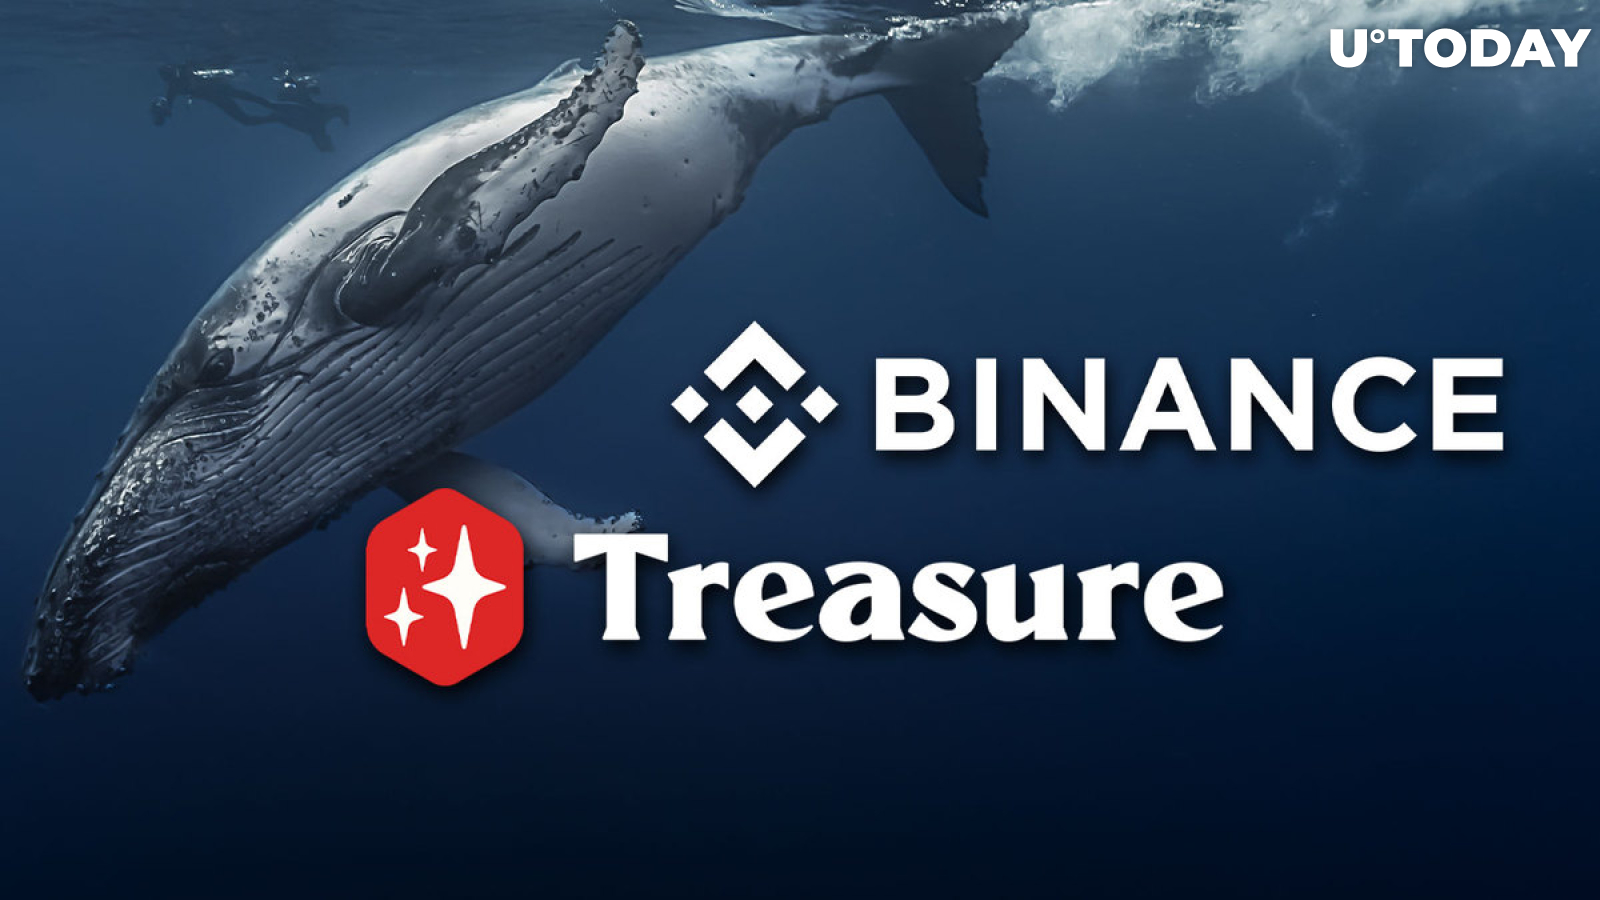 After Whale Buys $800,000 Worth of MAGIC, Binance Announces Listing in Innovation Zone